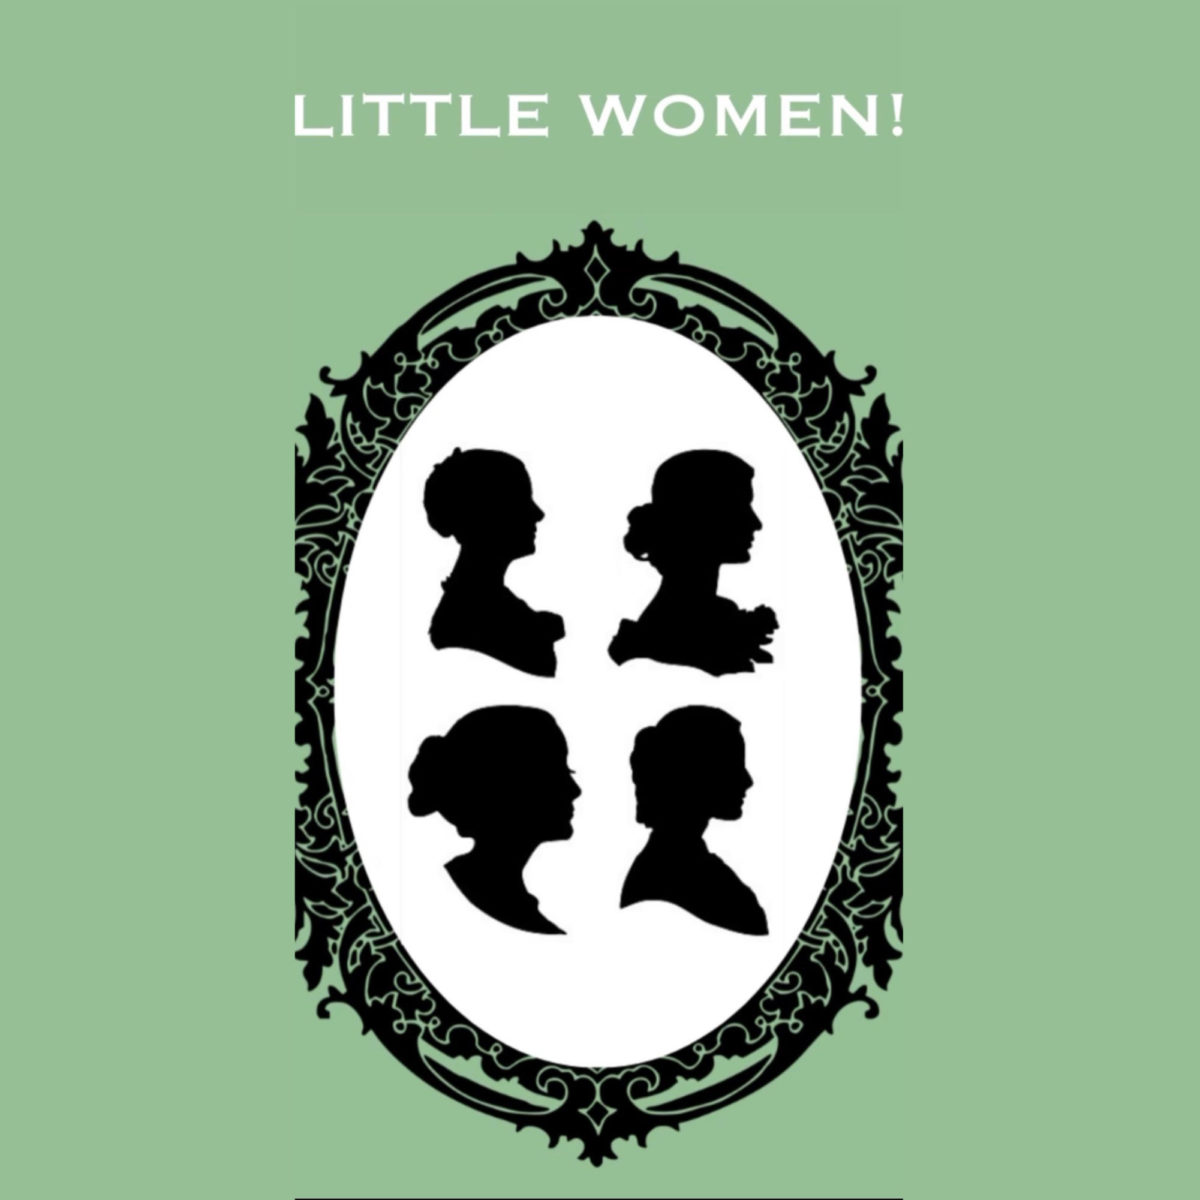 Drama club will hold auditions for “Little Women” next week